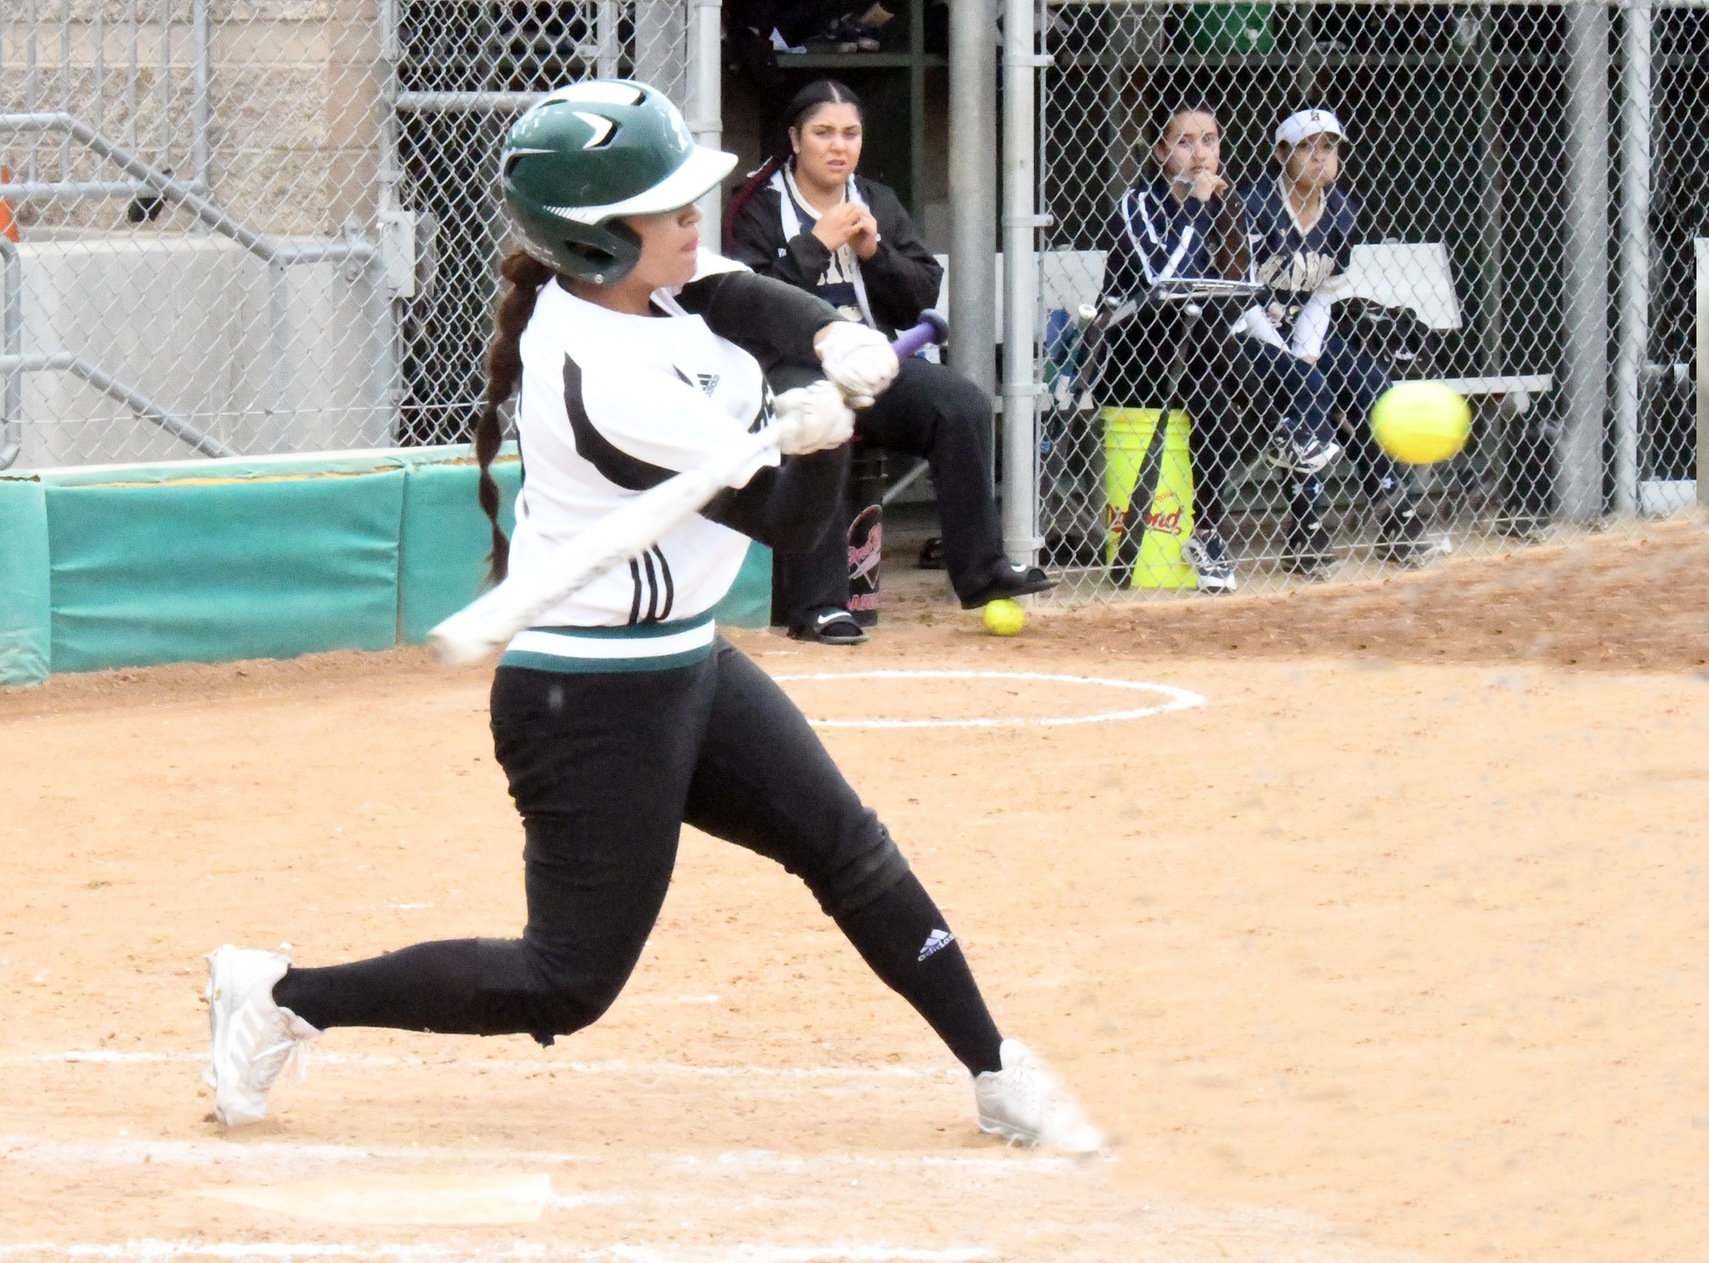 The East Los Angeles College softball team beat Compton College 15-7 in a 20-hit attack on Feb. 15. Catcher Destiny Avena, pictured, tripled with two runs batted in. (Photo by DeeDee Jackson)